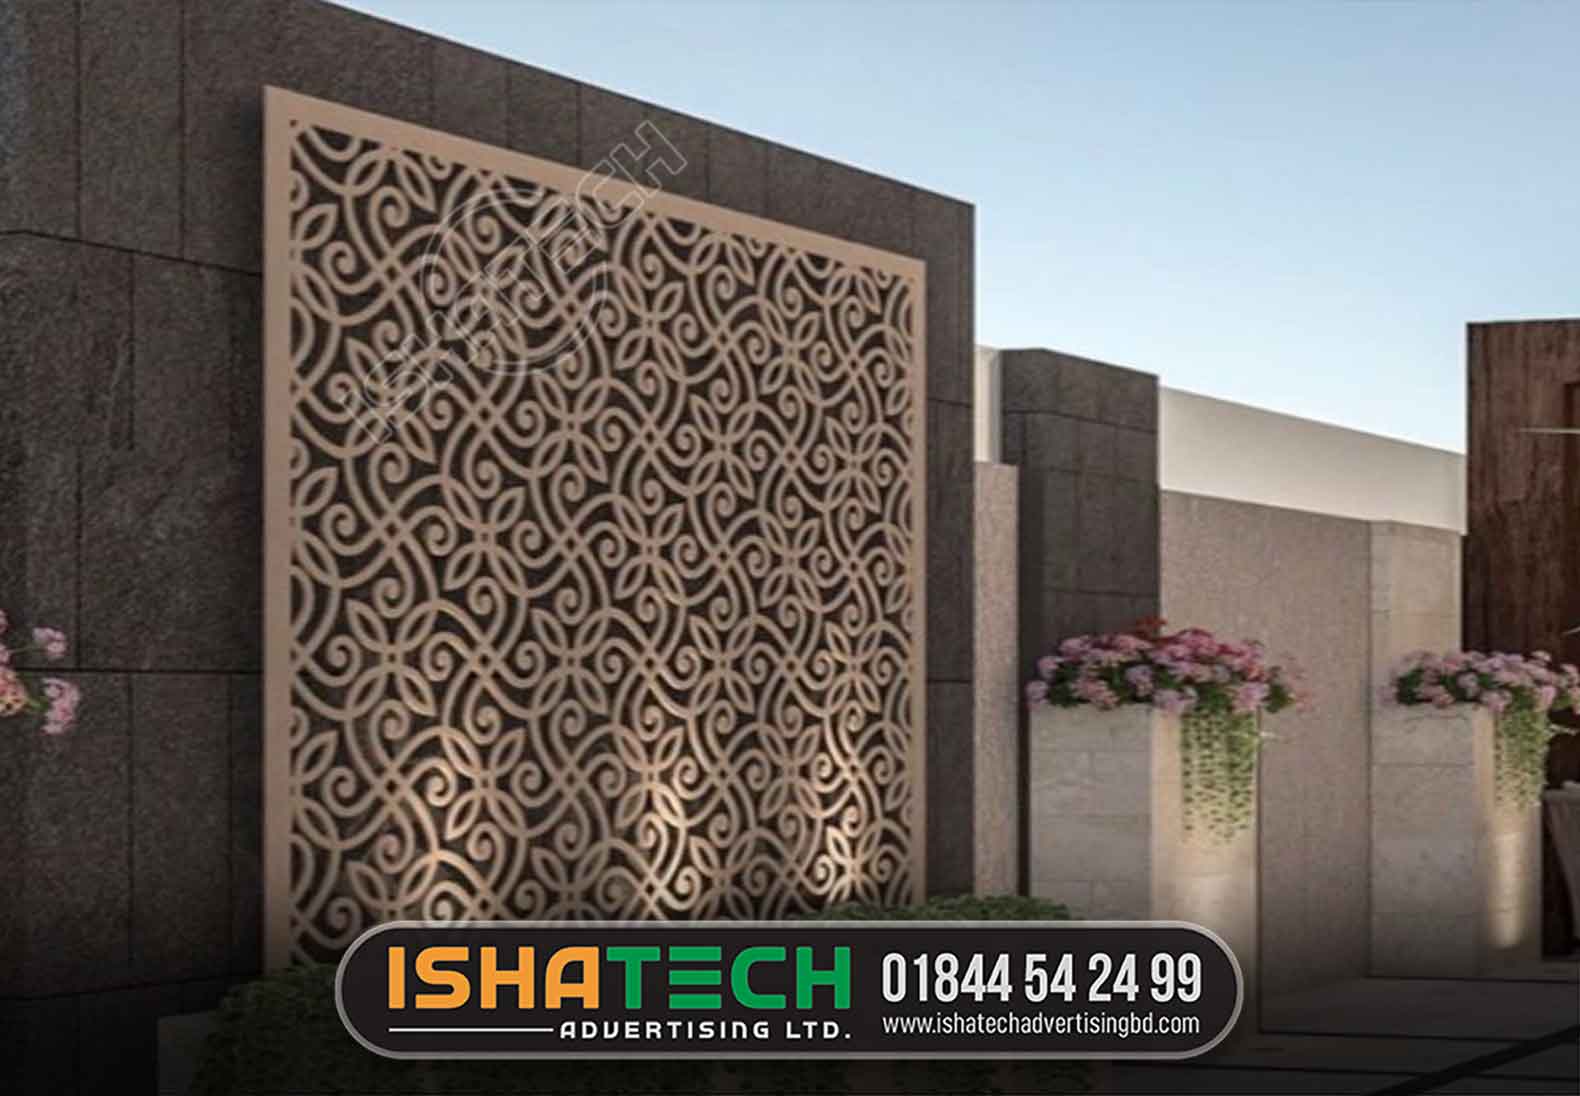 Metal perforated panels, steel plates, Marble & Gypsum, 3D panels, wood mashrabiya. Laser cutting services & Cnc router cutting services.